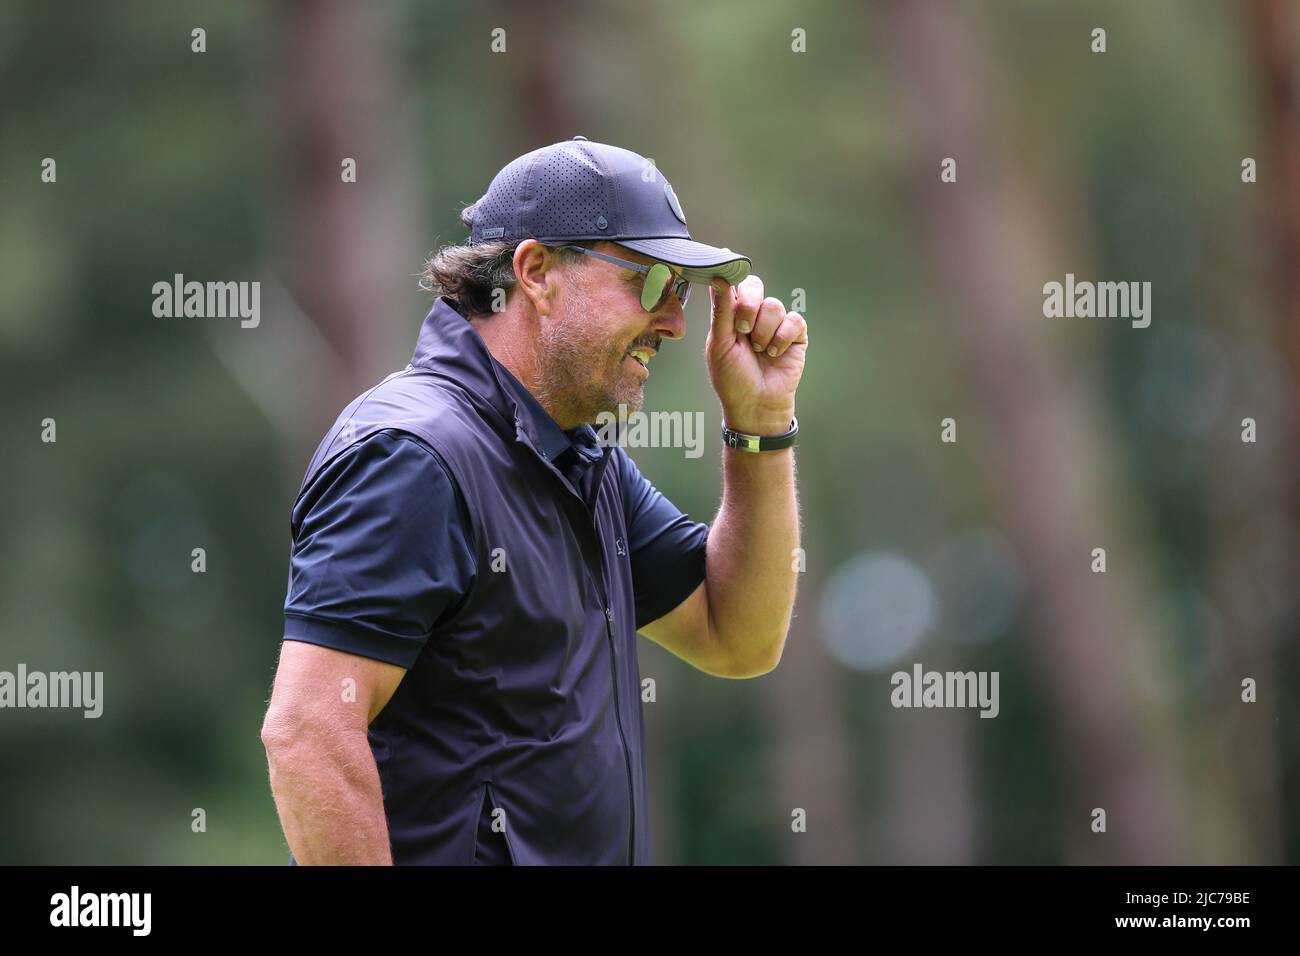 ST ALBANS, ENGLAND - JUNE 09: Phil Mickelson of the United States acknowledges the fans during day one of the LIV Golf Invitational at The Centurion Club on June 9, 2022 in St Albans, England. (MB Media) Stock Photo